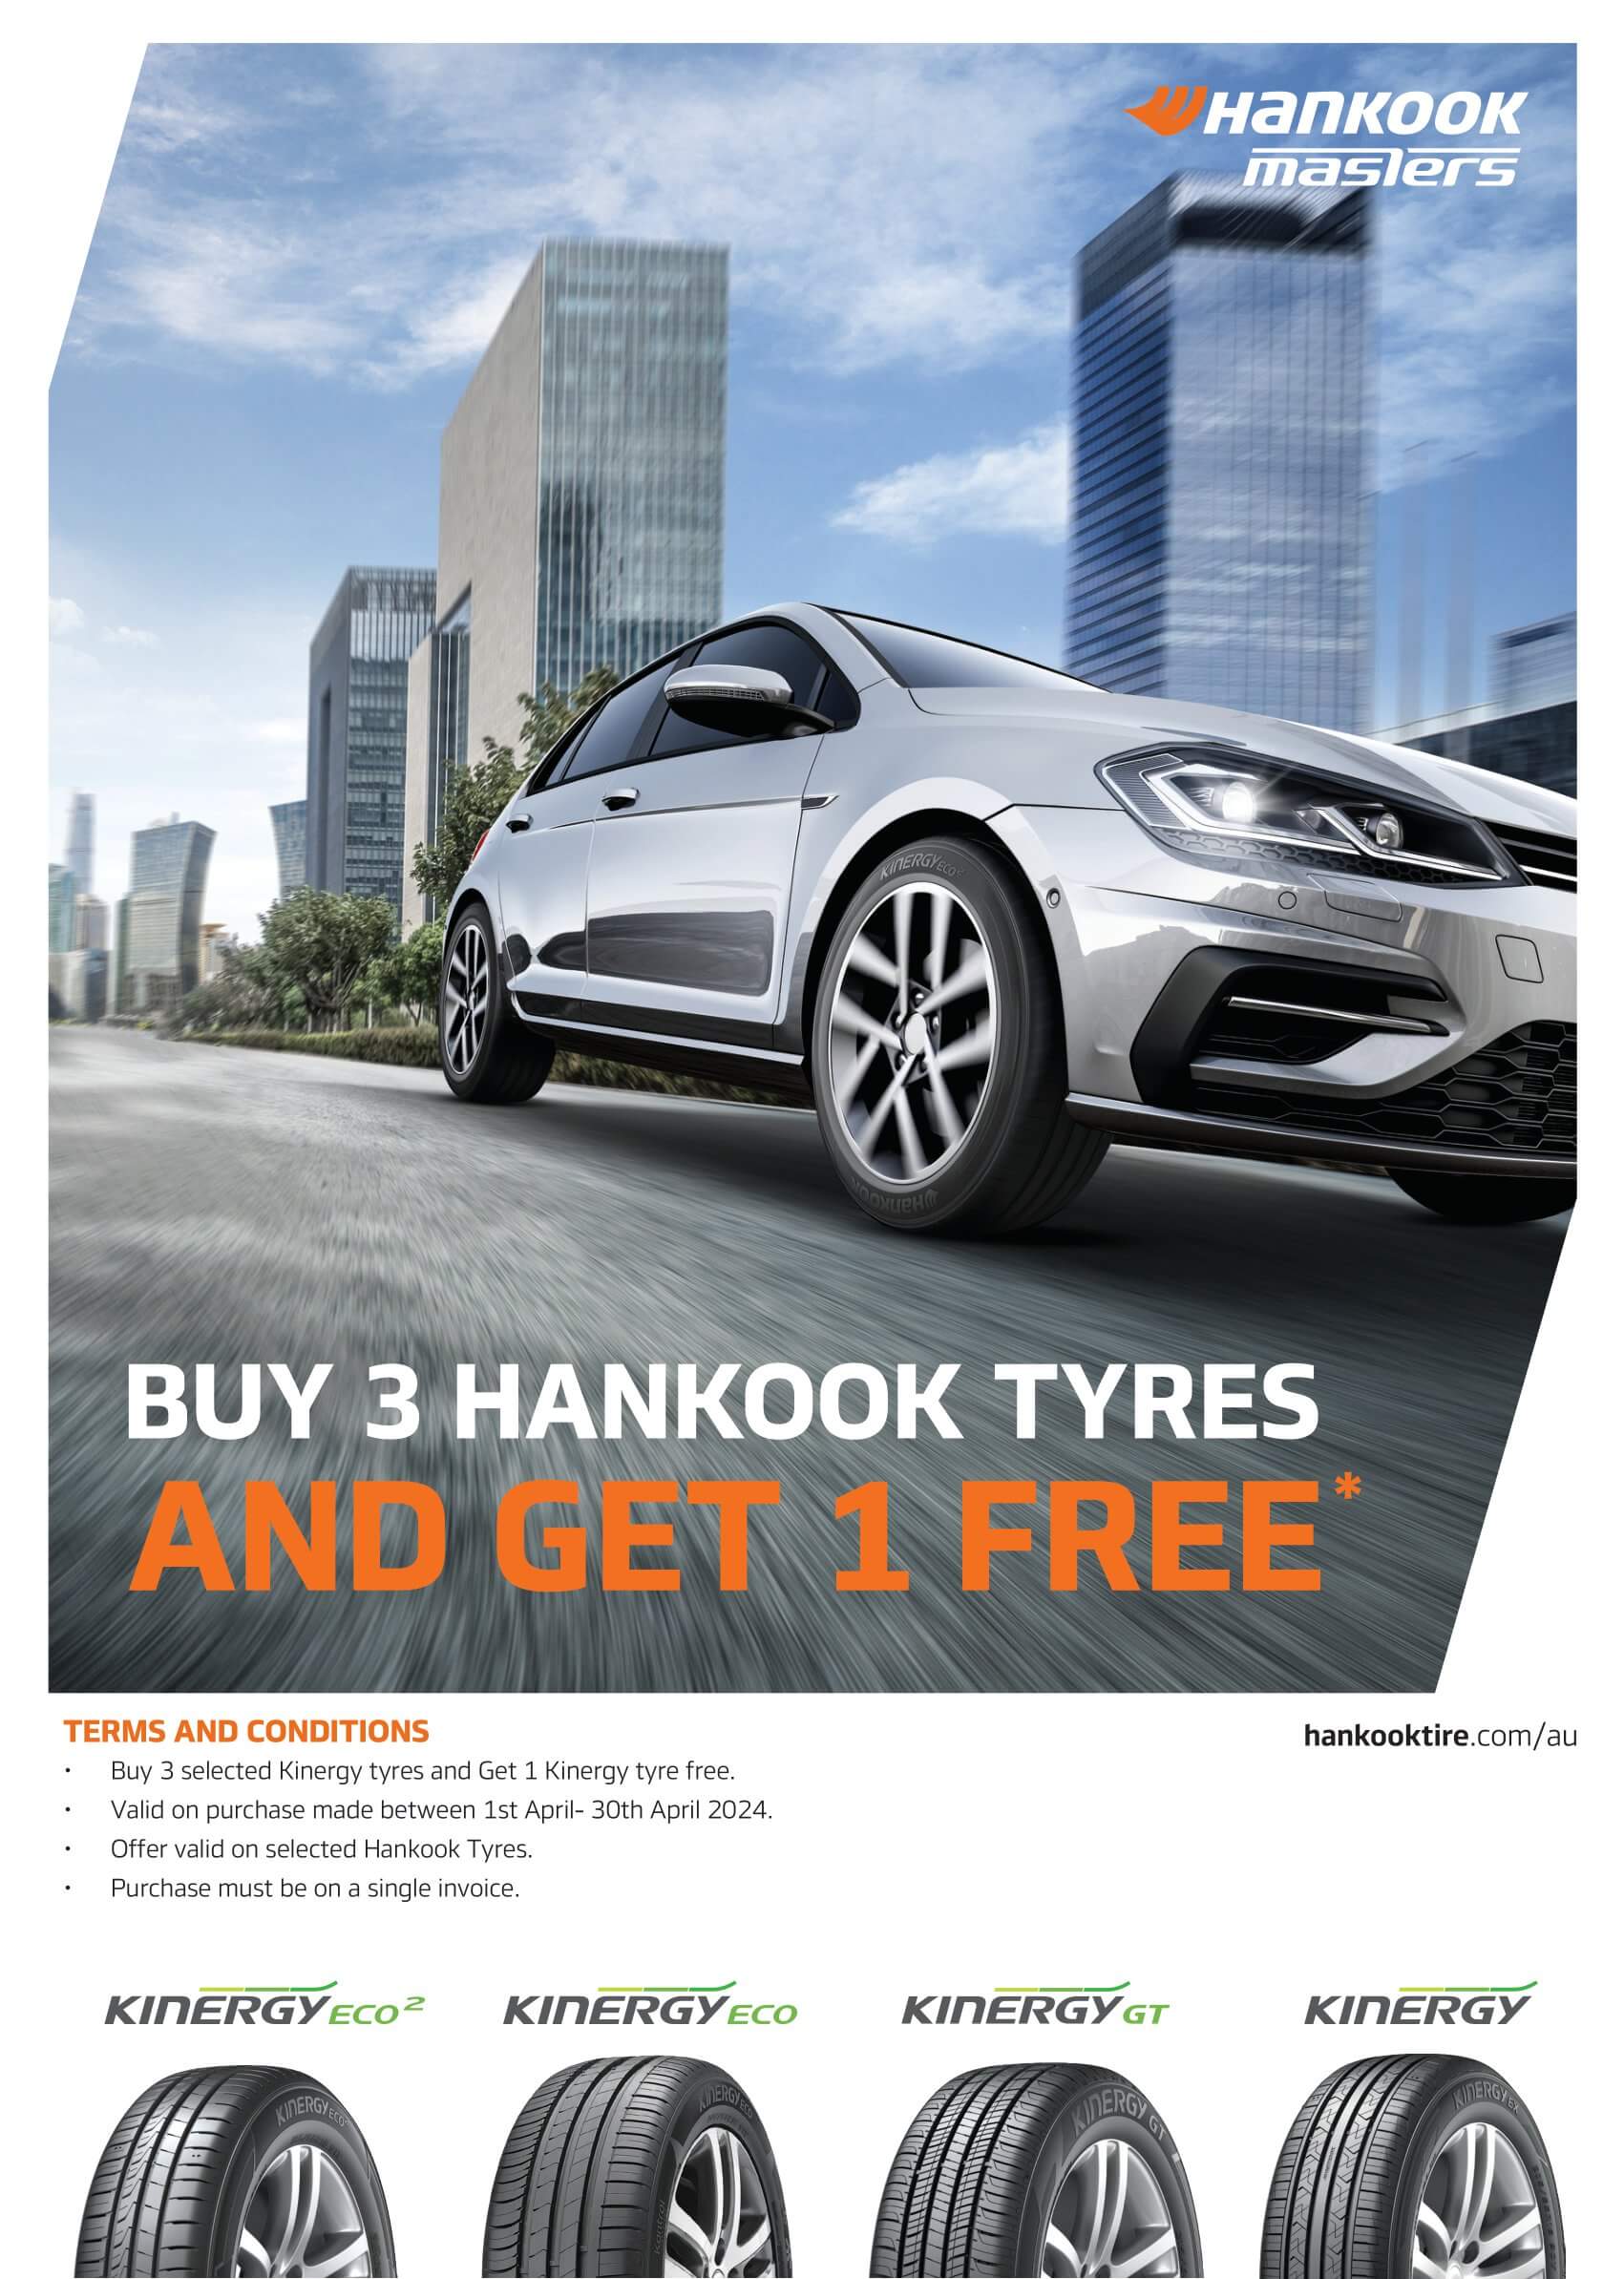 Buy 3 Hankook Tyres and get 1 free